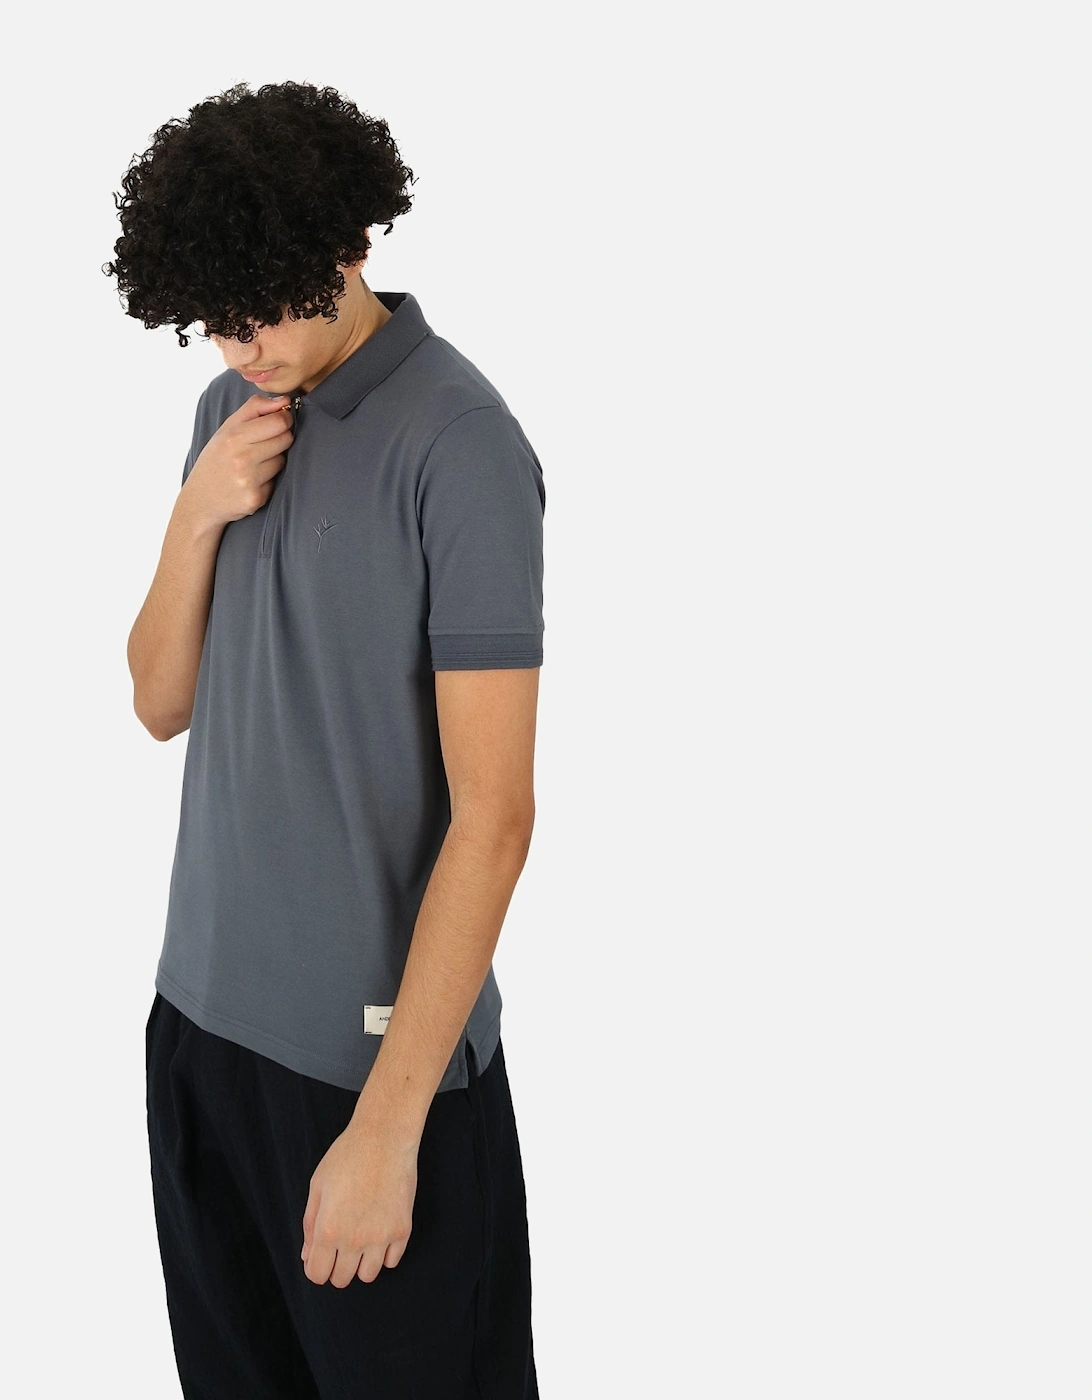 Embroidered Zip Grey Polo